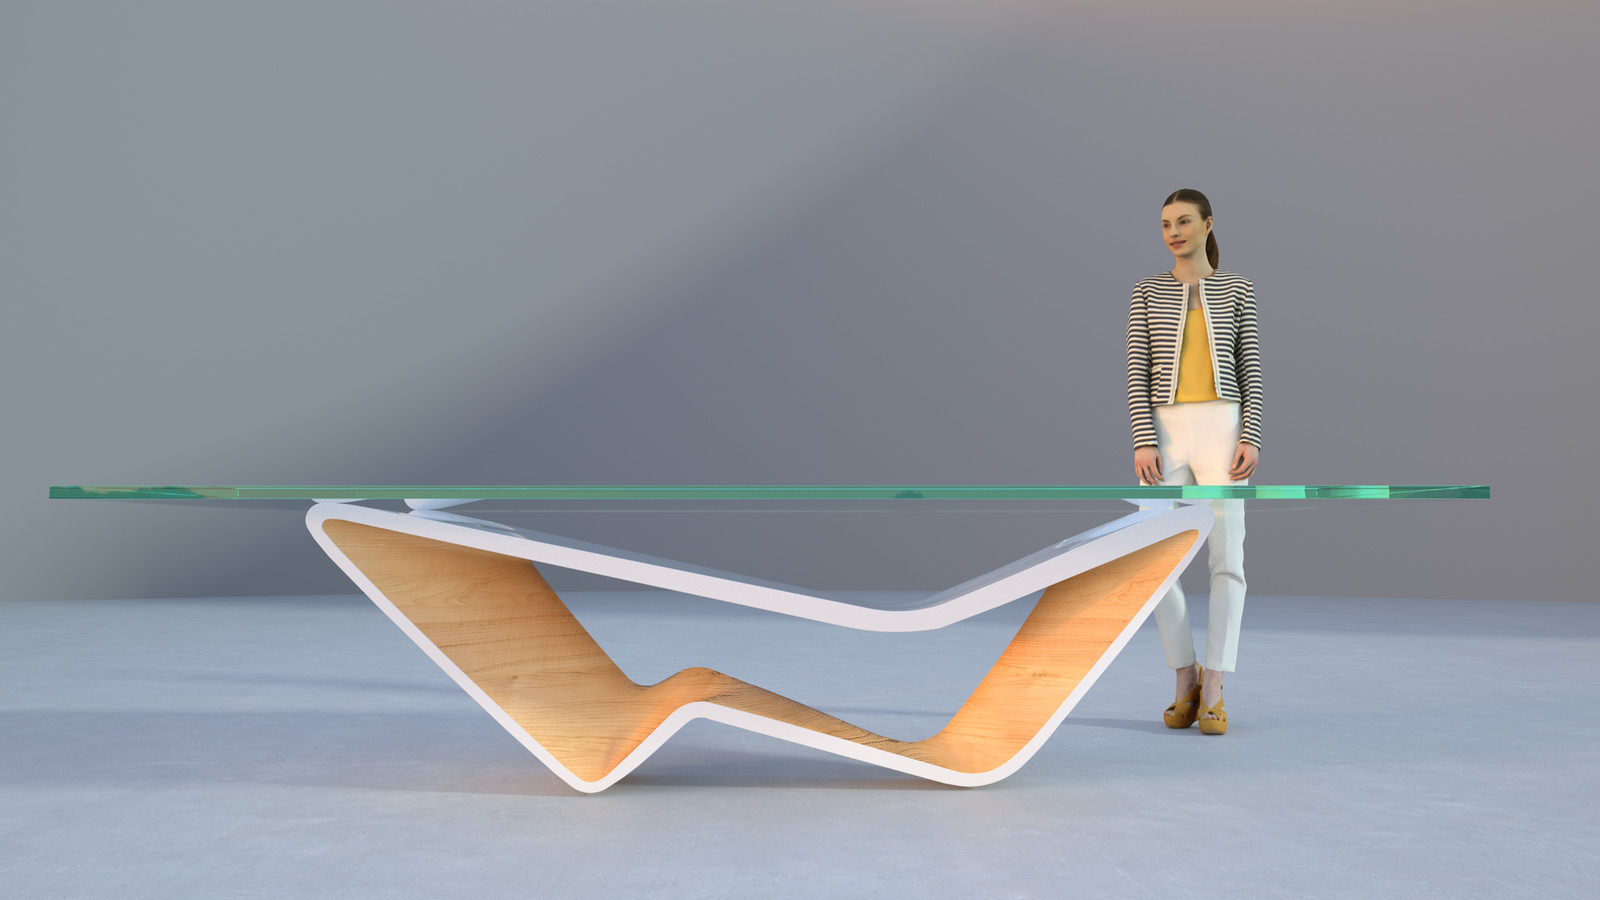 SketchUp + Thea Render 
Version 2 
Wilmer Chaca Table 02-Scene 7

Table construction video here: https://www.facebook.com/Kemp.Productions/videos/1211294868916088/ 